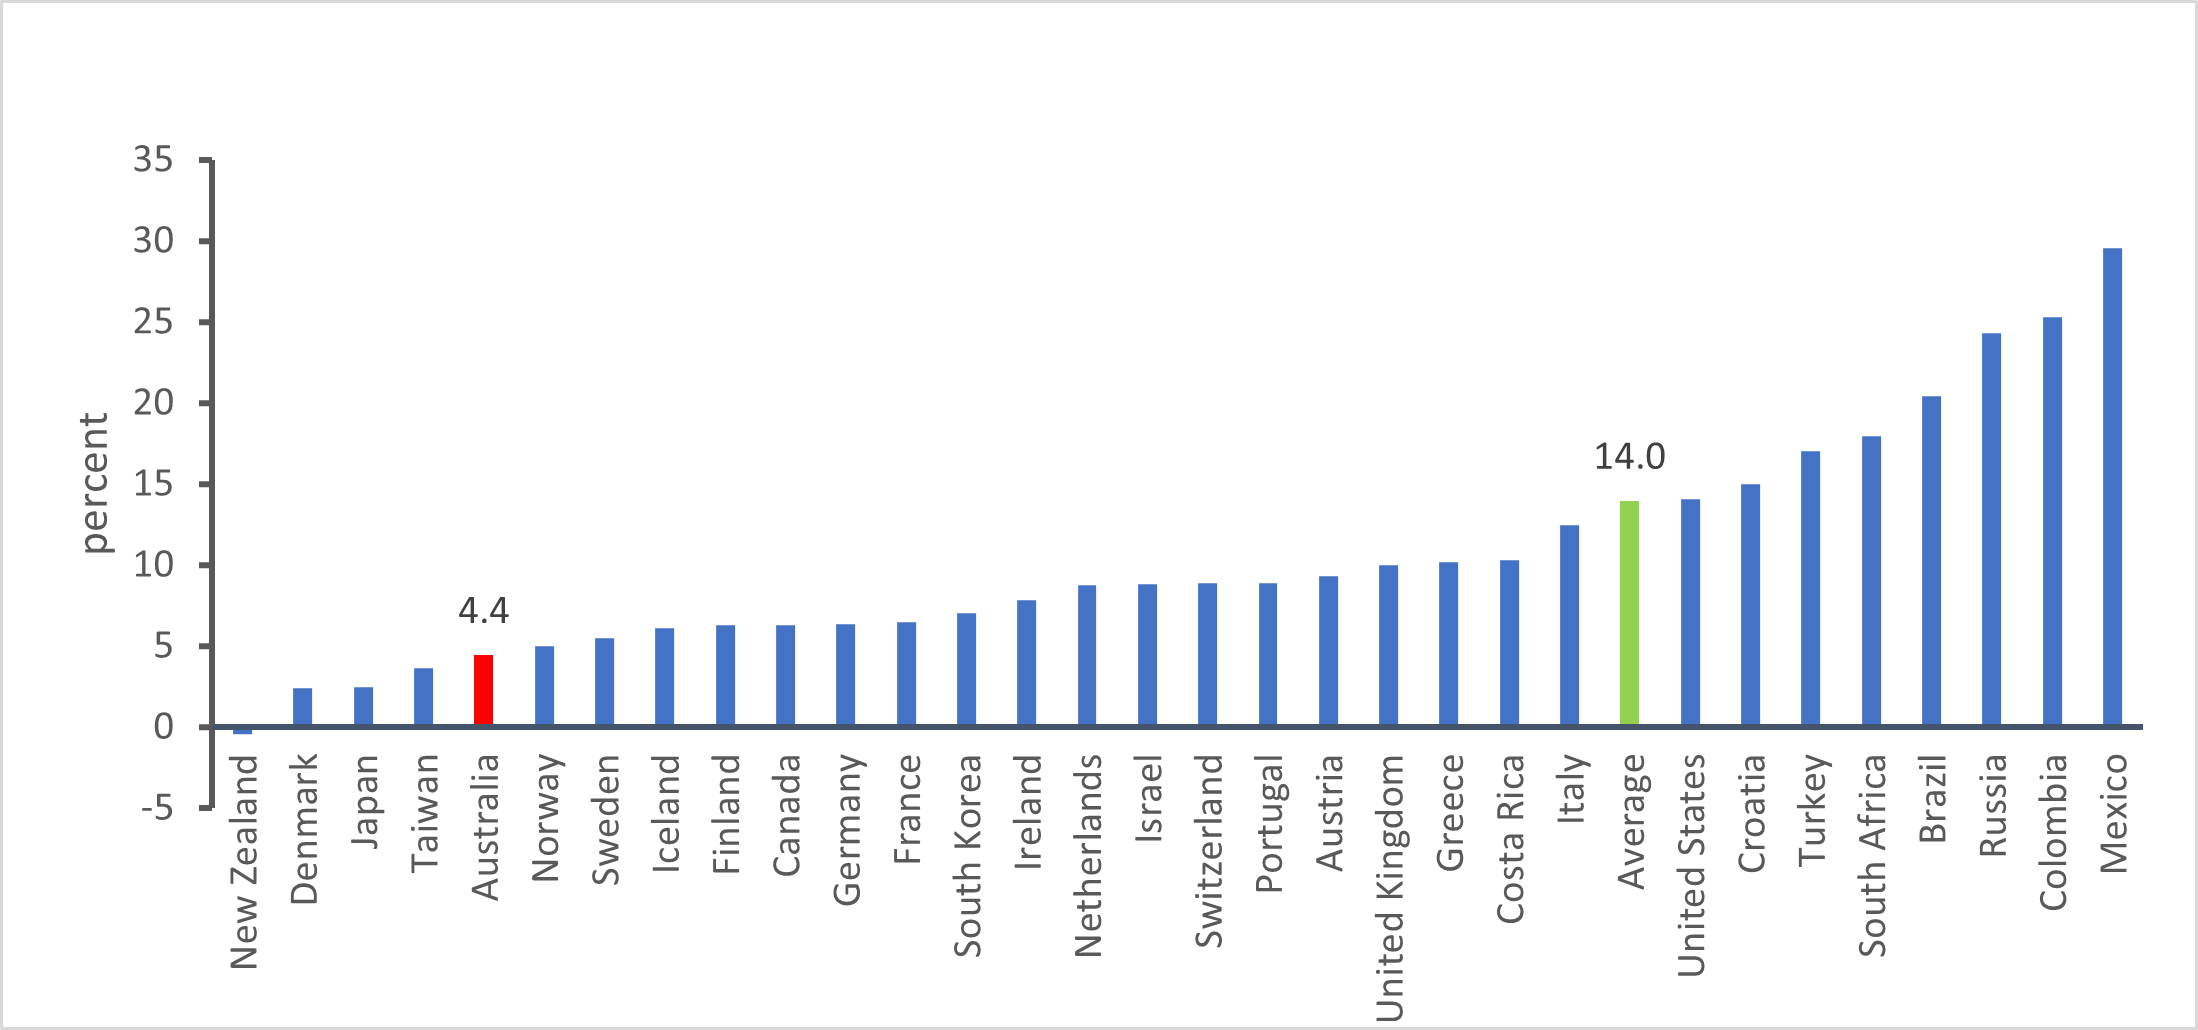 The column chart shows the percentage of excess deaths among 30 countries from 2020 to 2022. Australia had 4.4% excess mortality ranking the 4th lowest, while the average was at 14%. Countries with excess mortality higher than the average are USA, Croatia, Turkey, South Africa, Brazil, Russia, Colombia and Mexico.  